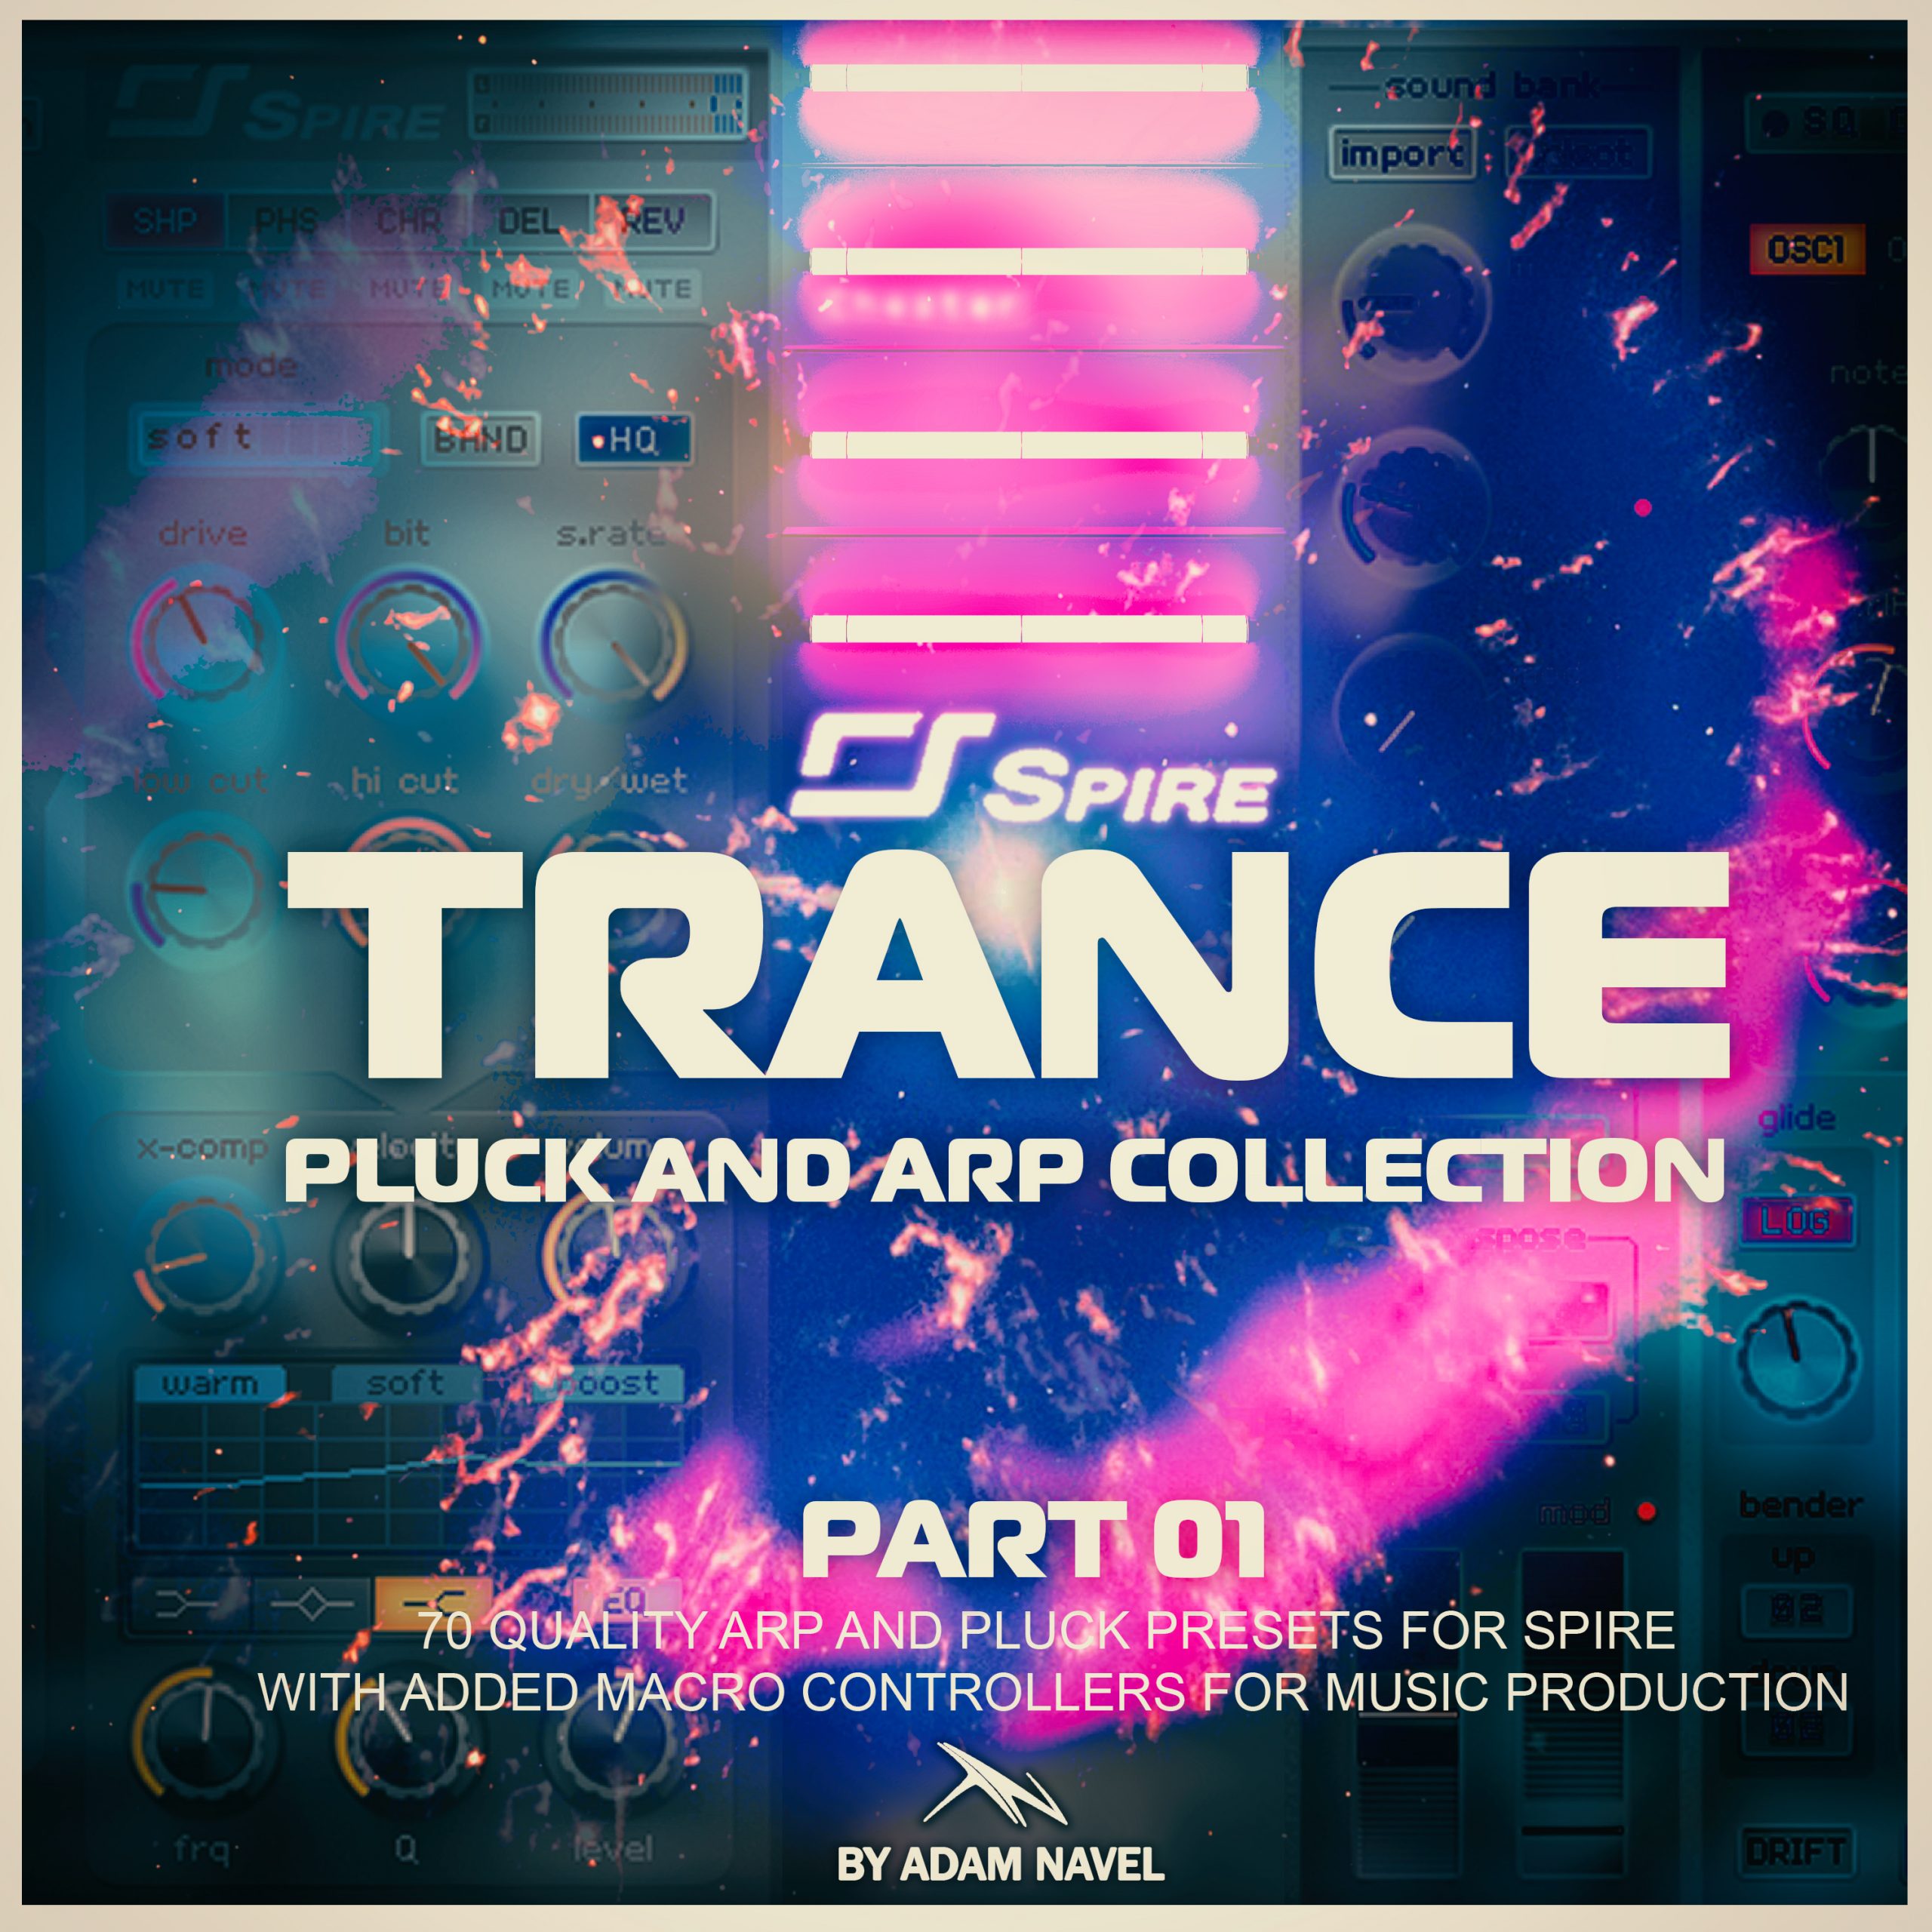 Trance_Arp_and_Pluck_Collection_01_By-Adam_Navel_Spire-scaled.jpg